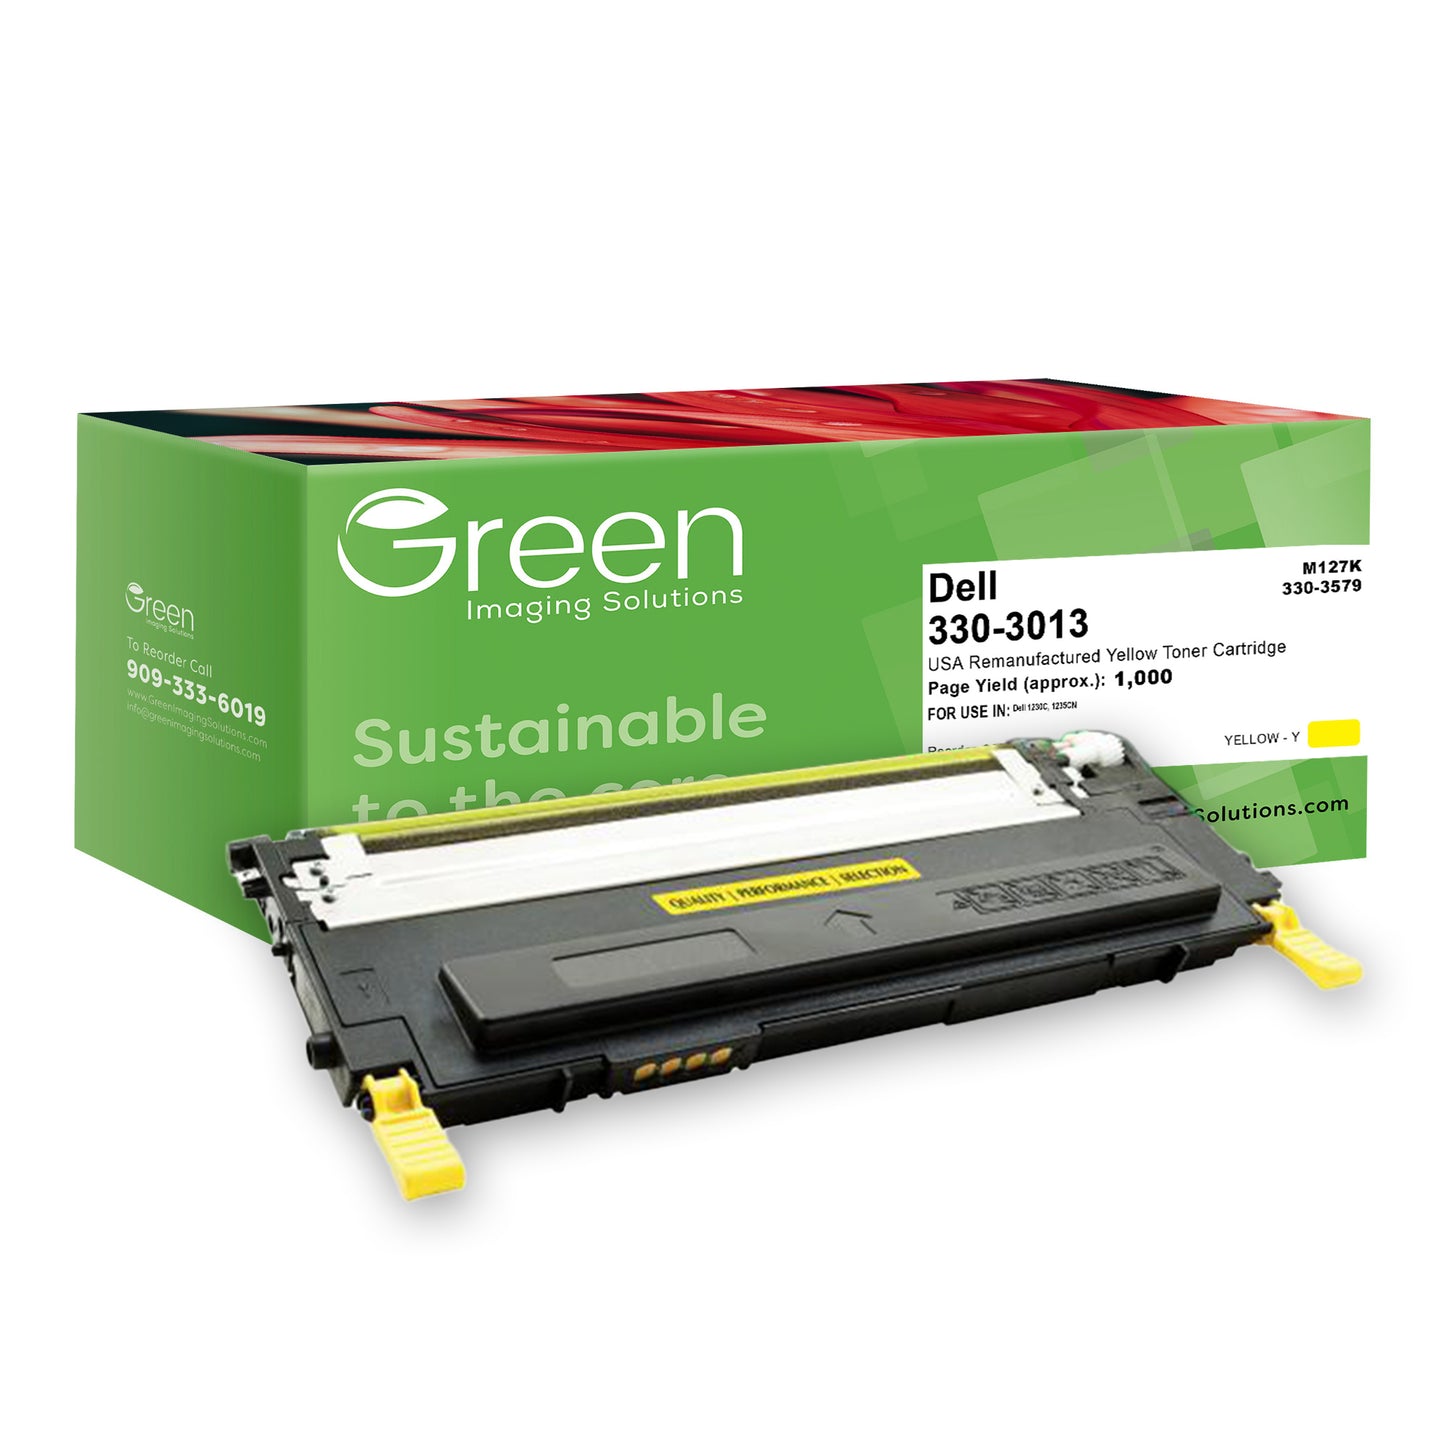 Green Imaging Solutions USA Remanufactured Yellow Toner Cartridge for Dell 1230/1235